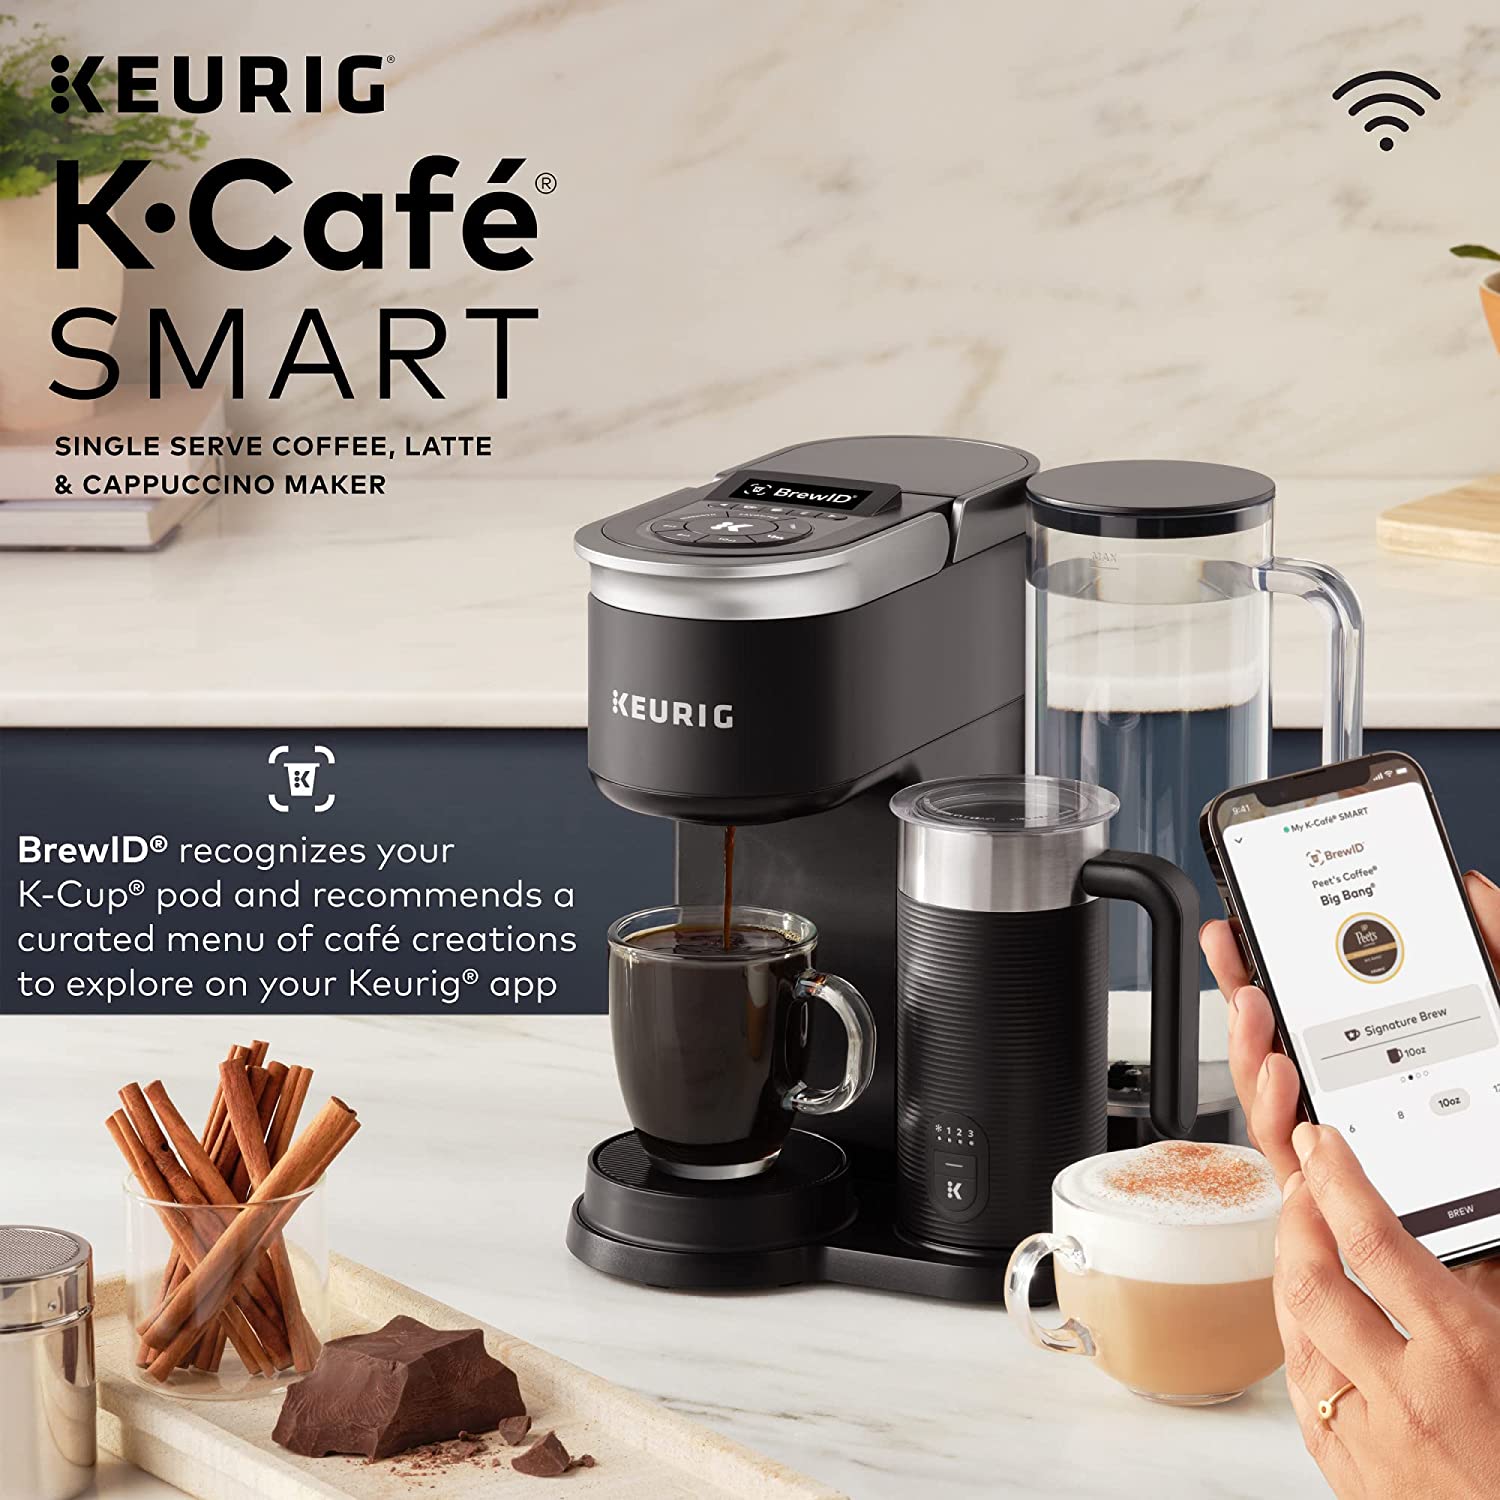 https://discounttoday.net/wp-content/uploads/2022/11/Keurig-K-Cafe-SMART-Single-Serve-Coffee-Maker-with-WiFi-Compatibility-10.jpg